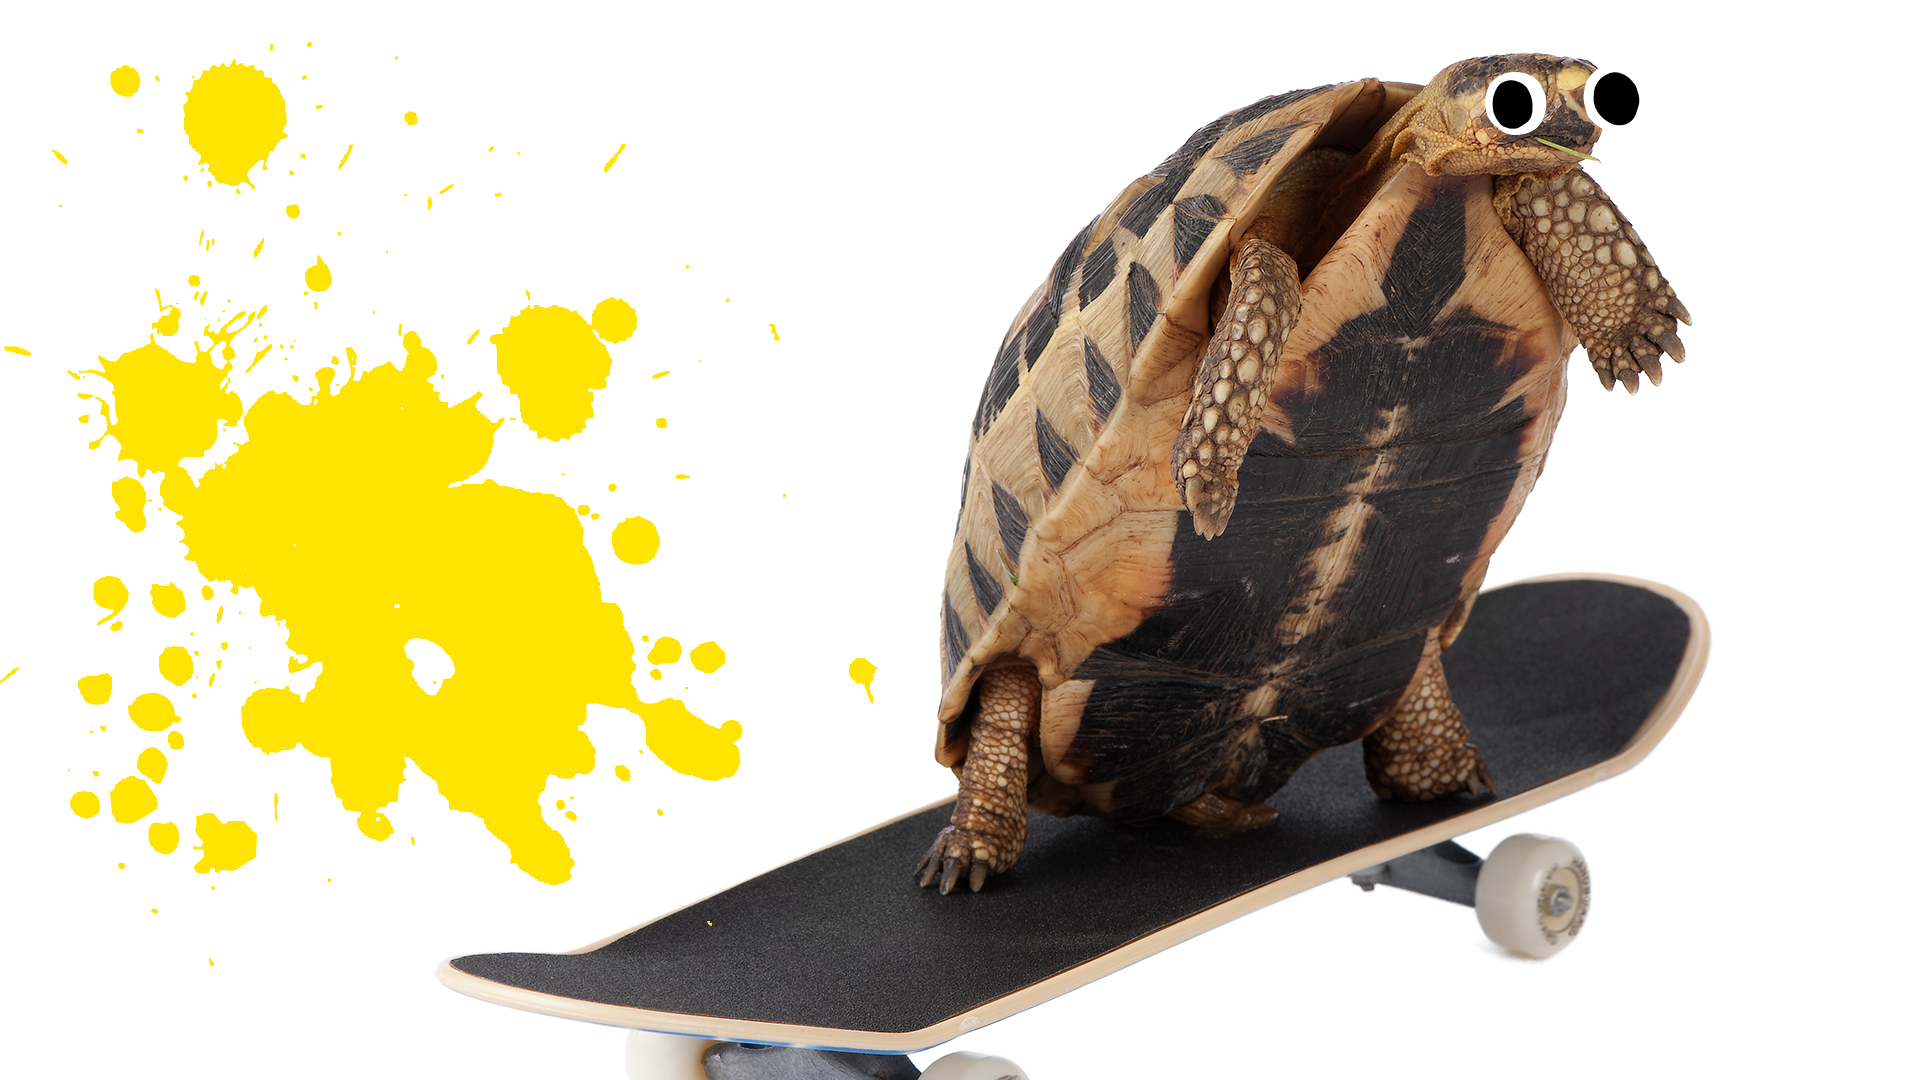 Tortoise on skateboard with yellow splat and white background